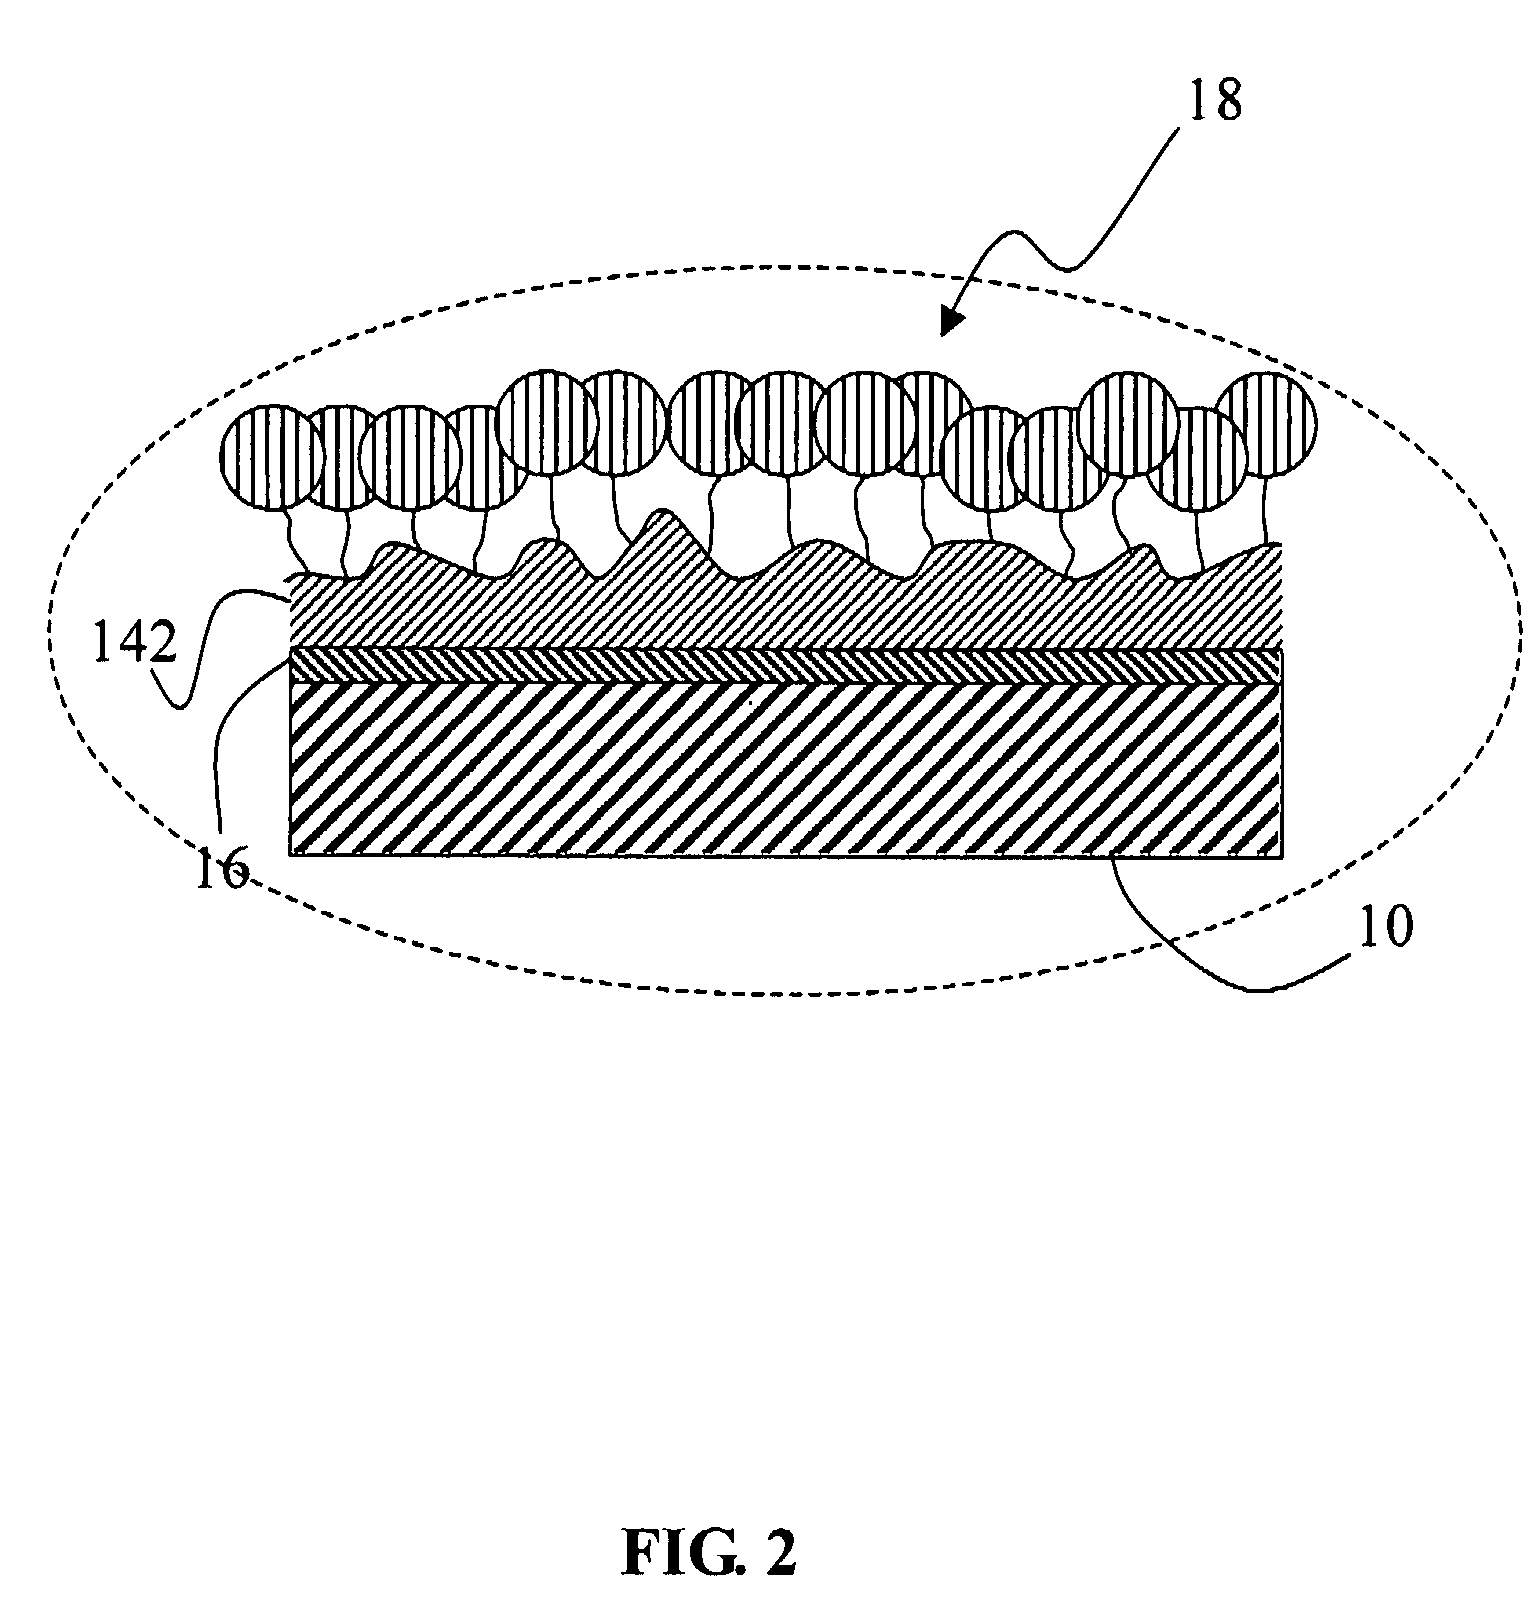 Coronary stent having a surface of multi-layer immobilized structures